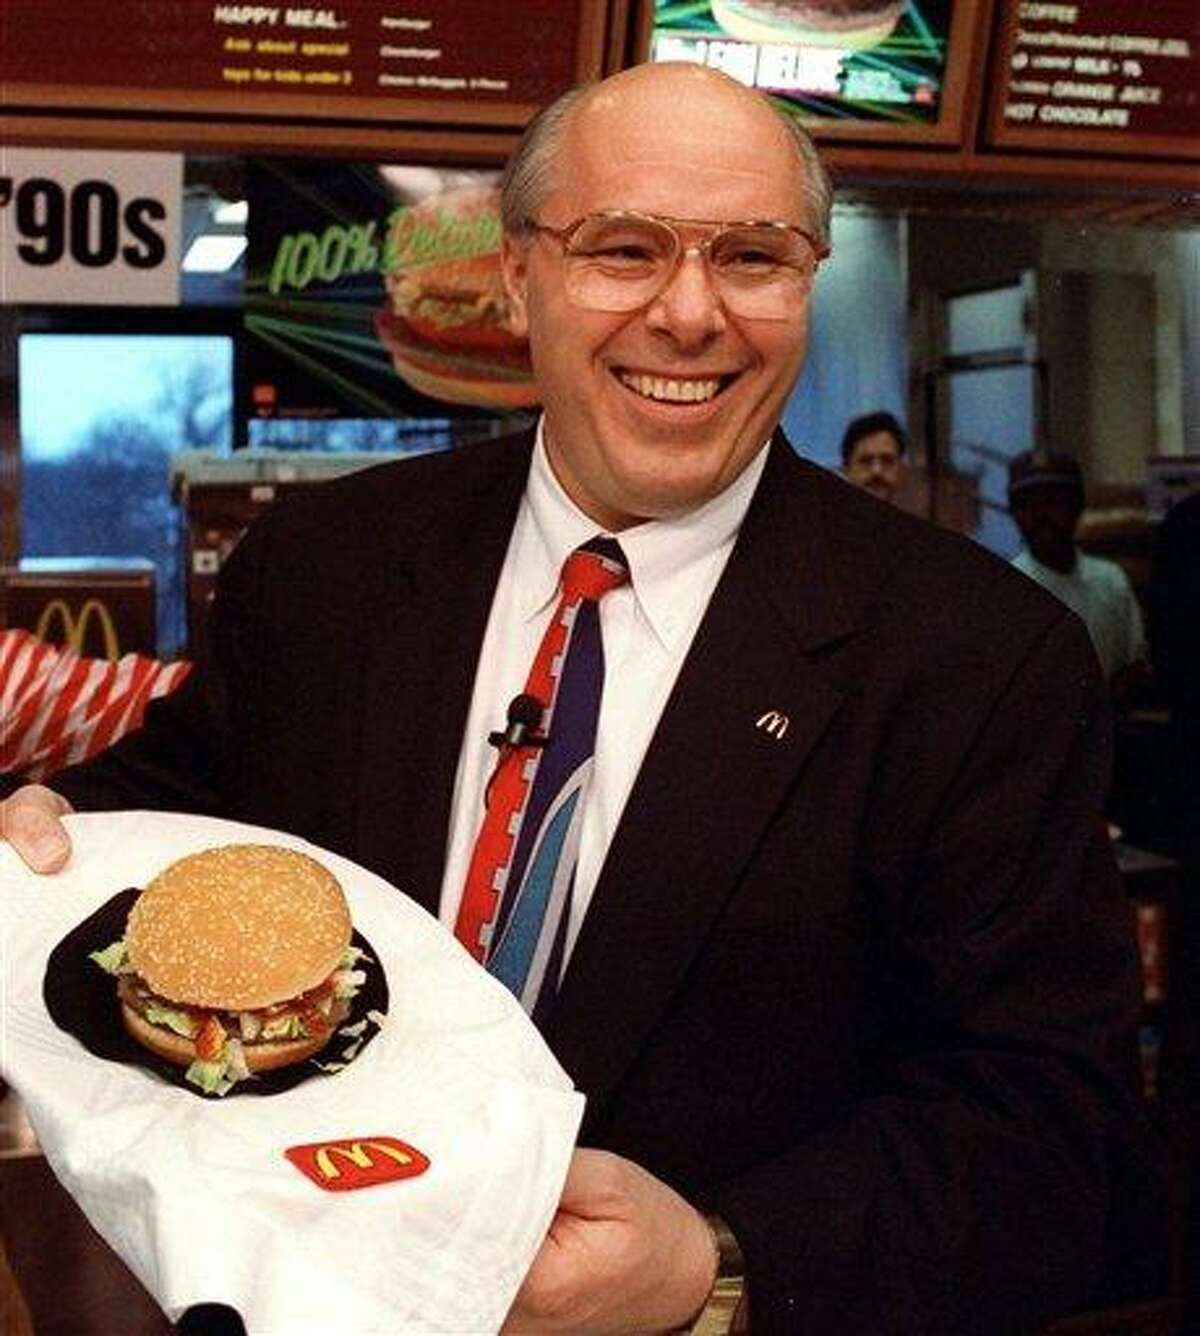 FILE - In this file photo of March 13, 1991, (then) McDonald's Corp. President Ed Rensi shows off the McLean Deluxe Burger during a news conference at the company's Oak Brook, Ill., headquarters. The lower fat hamburger made with seaweed derivative never really caught on with customers. (AP Photo/Ralf-Finn Hestoft, File)